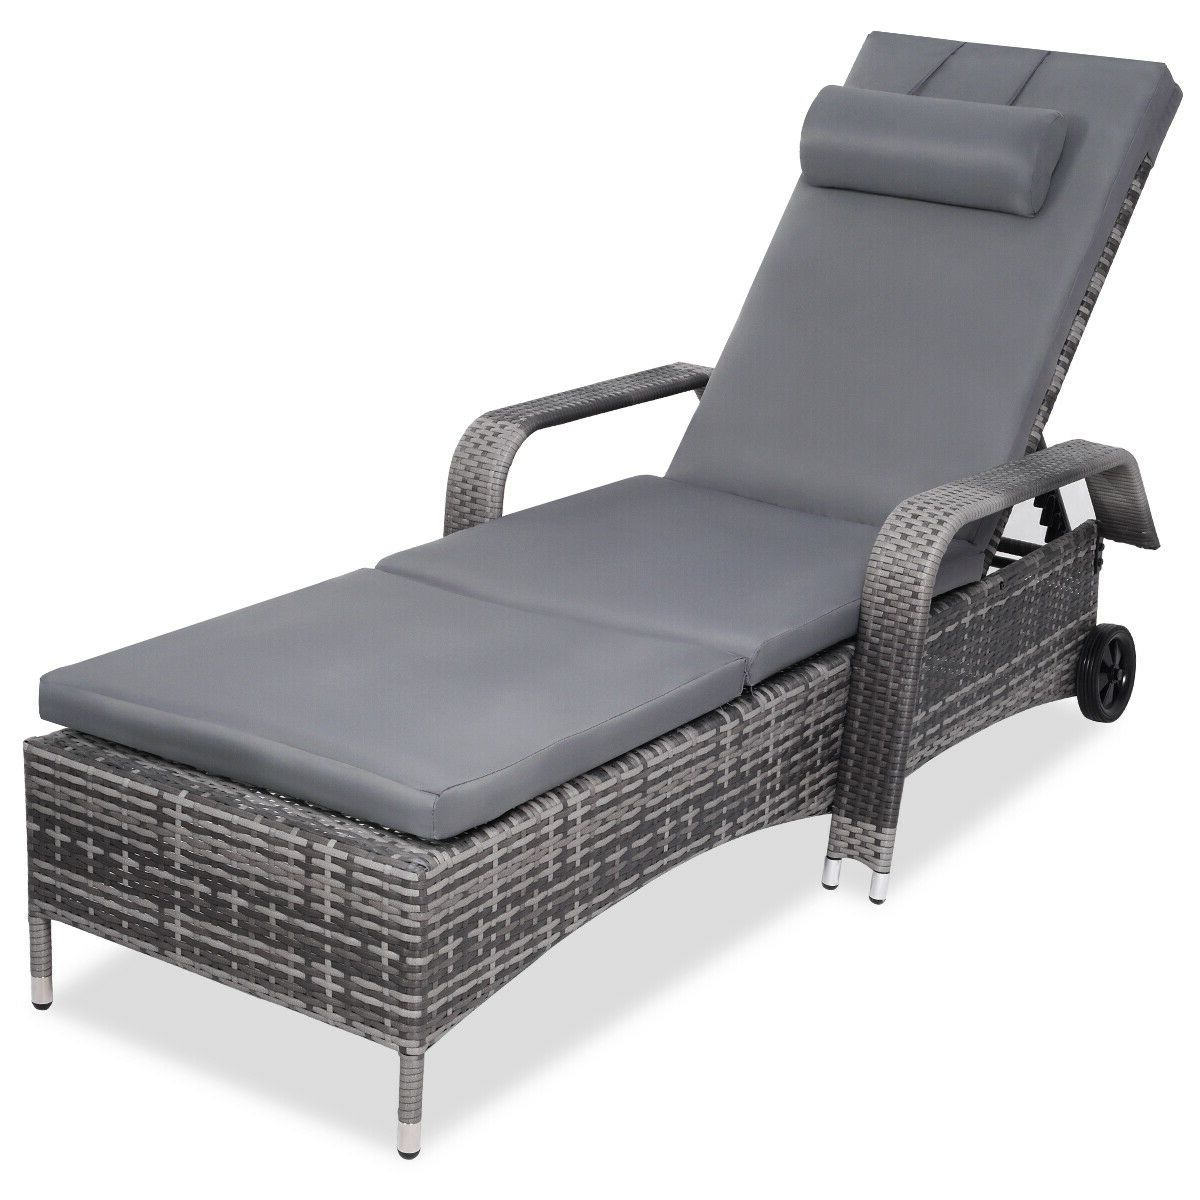 Wicker Chaise Lounge Chair Adjustable Outdoor Patio Furniture Reclining  Wheels Regarding Most Recent Cart Wheel Adjustable Chaise Lounge Chairs (View 7 of 25)